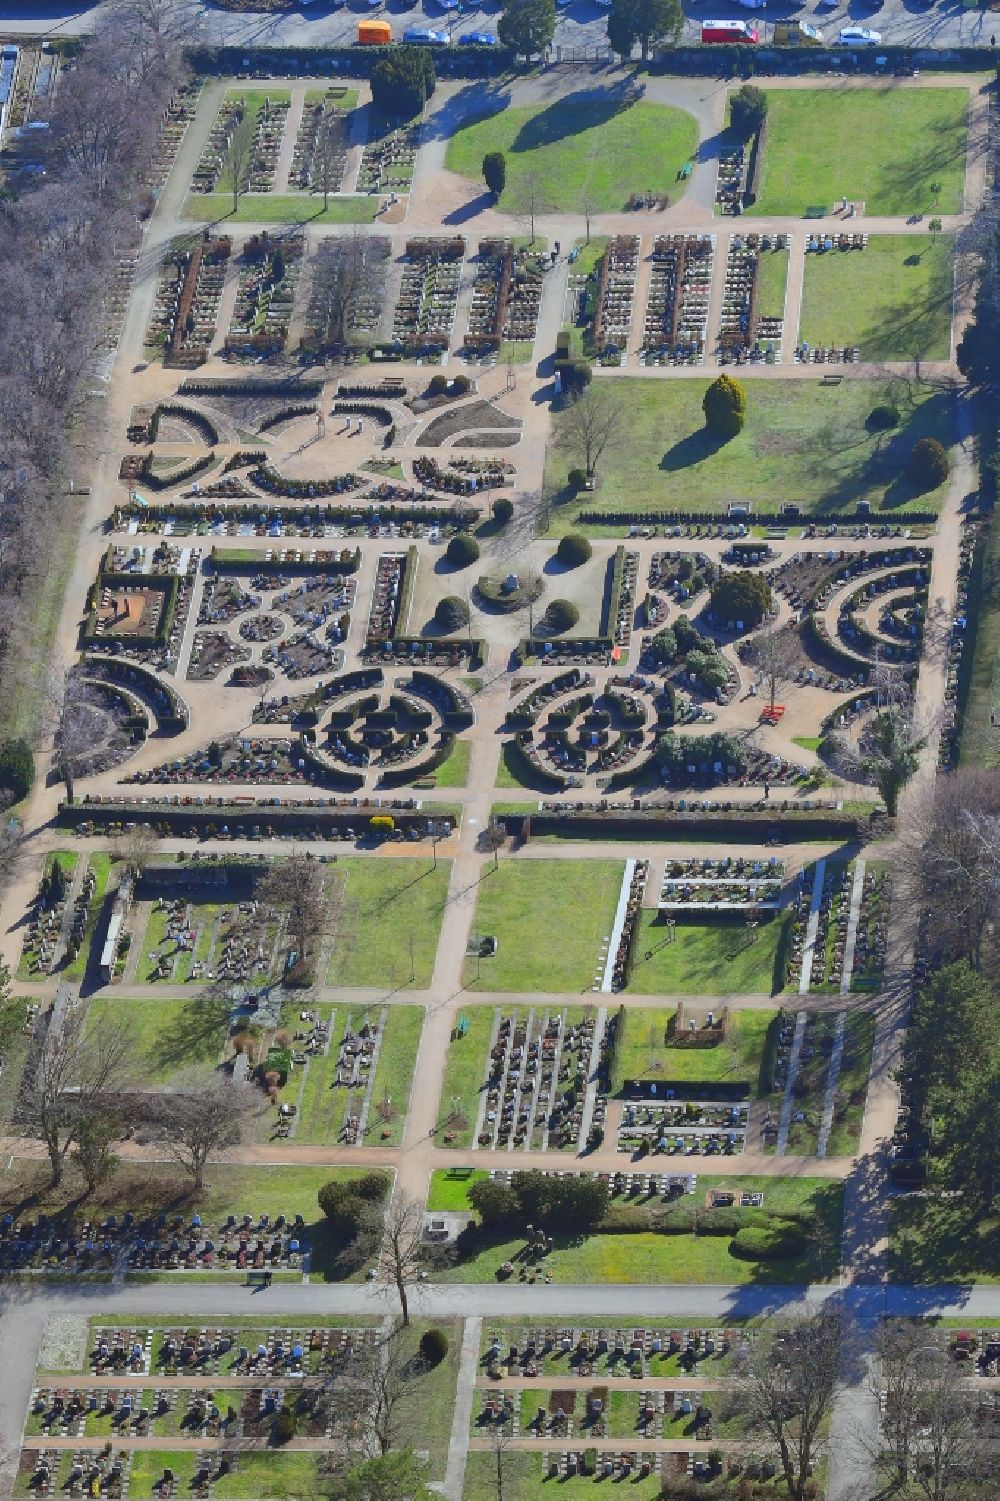 Weil am Rhein from the bird's eye view: Grave rows on the grounds of the cemetery Weil on Rhein in Weil am Rhein in the state Baden-Wuerttemberg, Germany